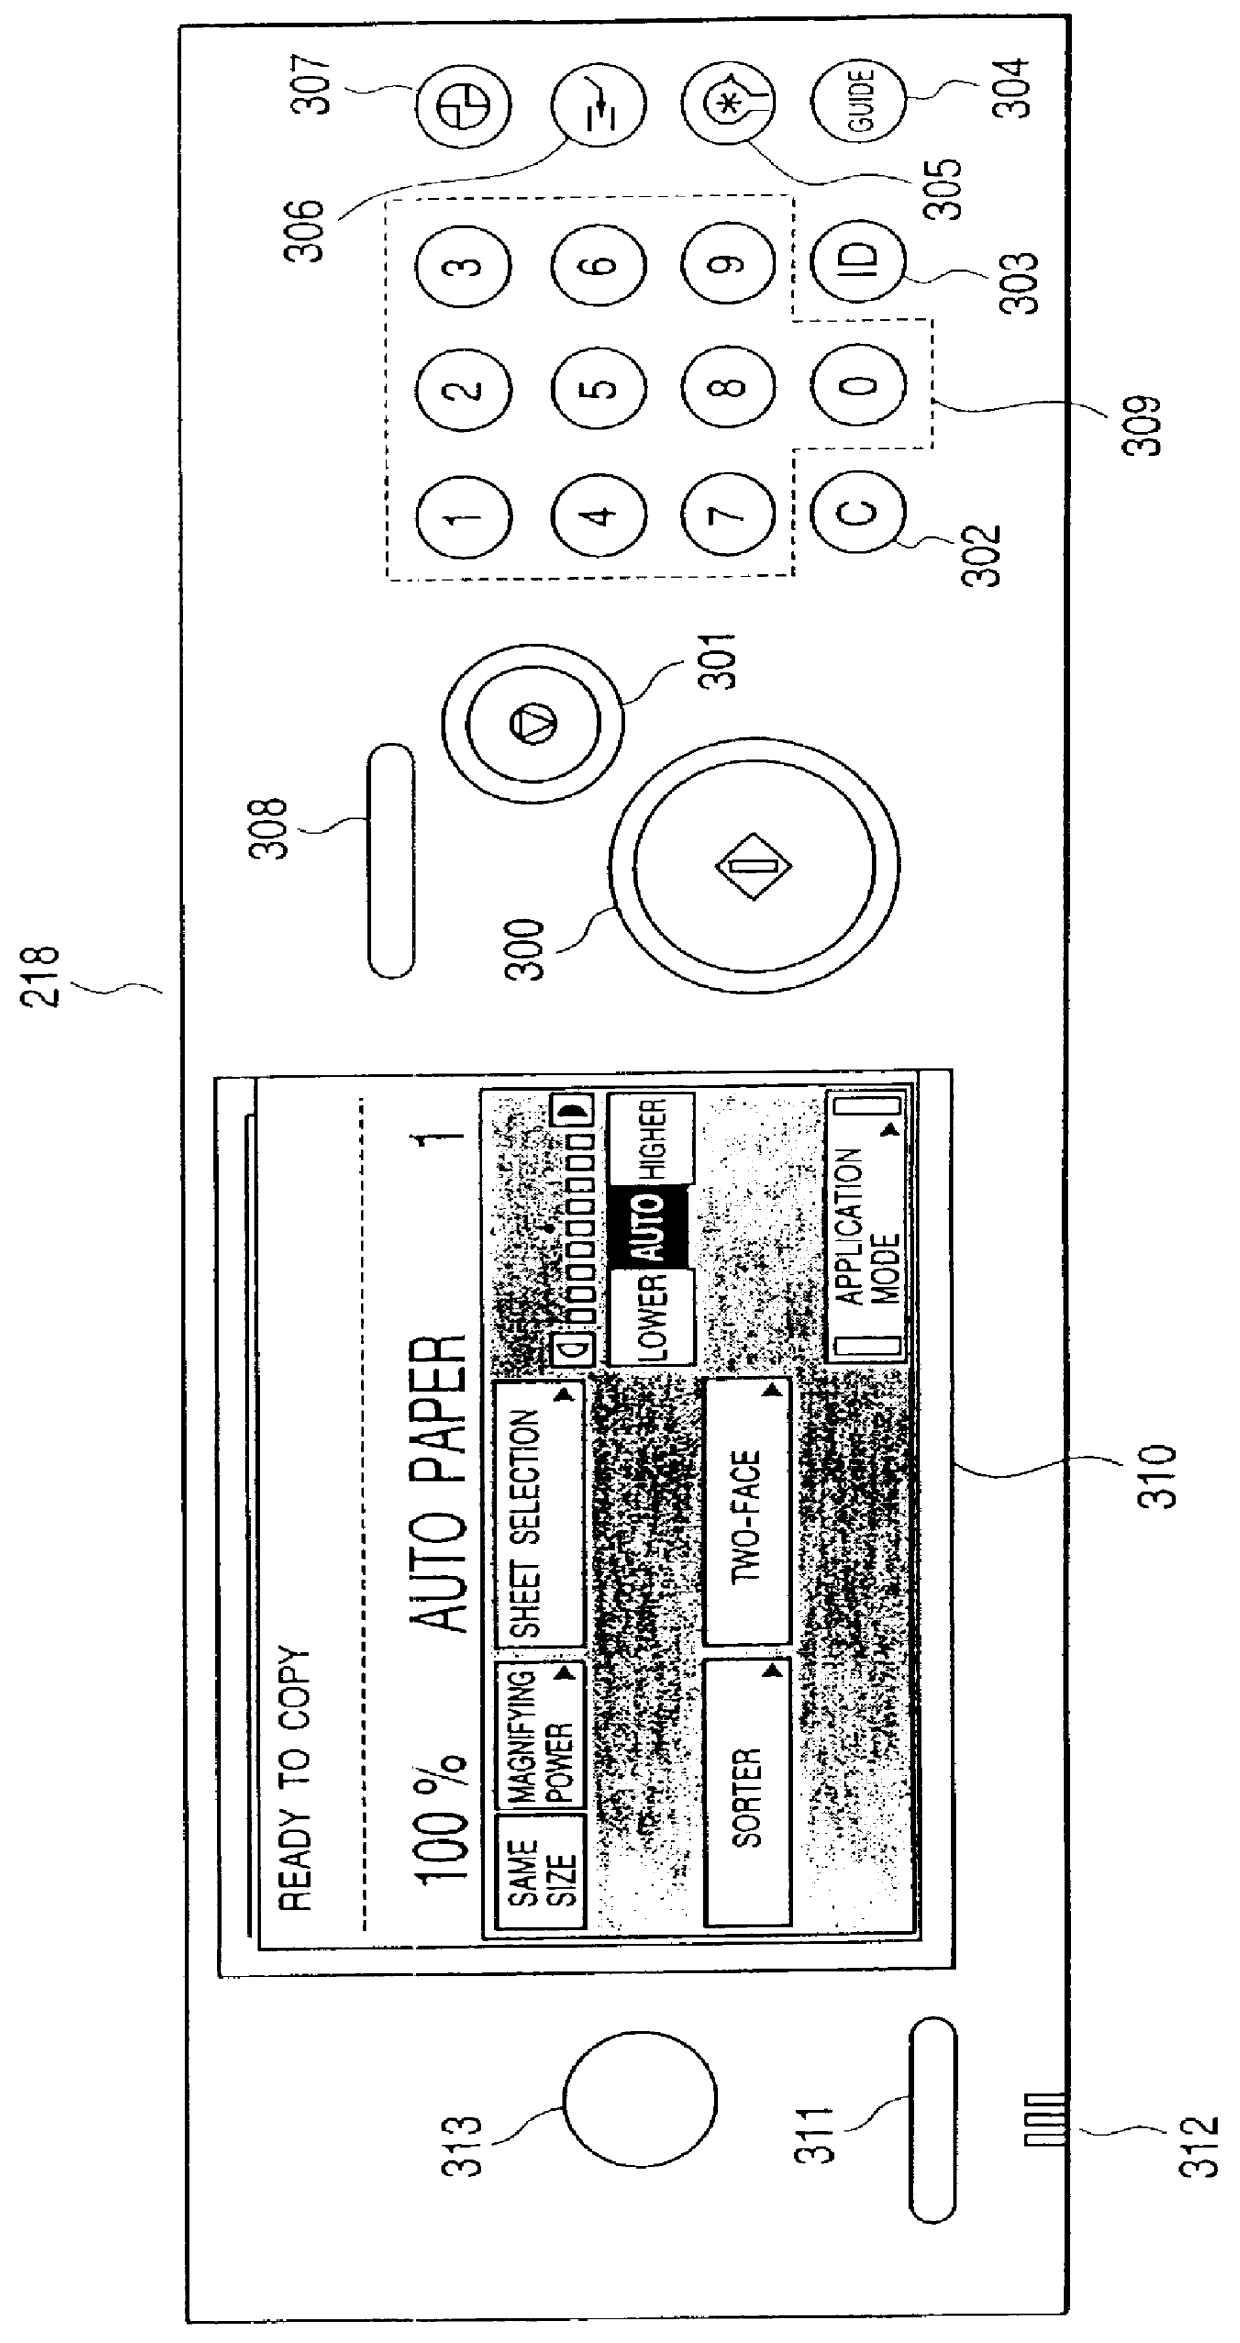 Image production equipment operable under voice direction